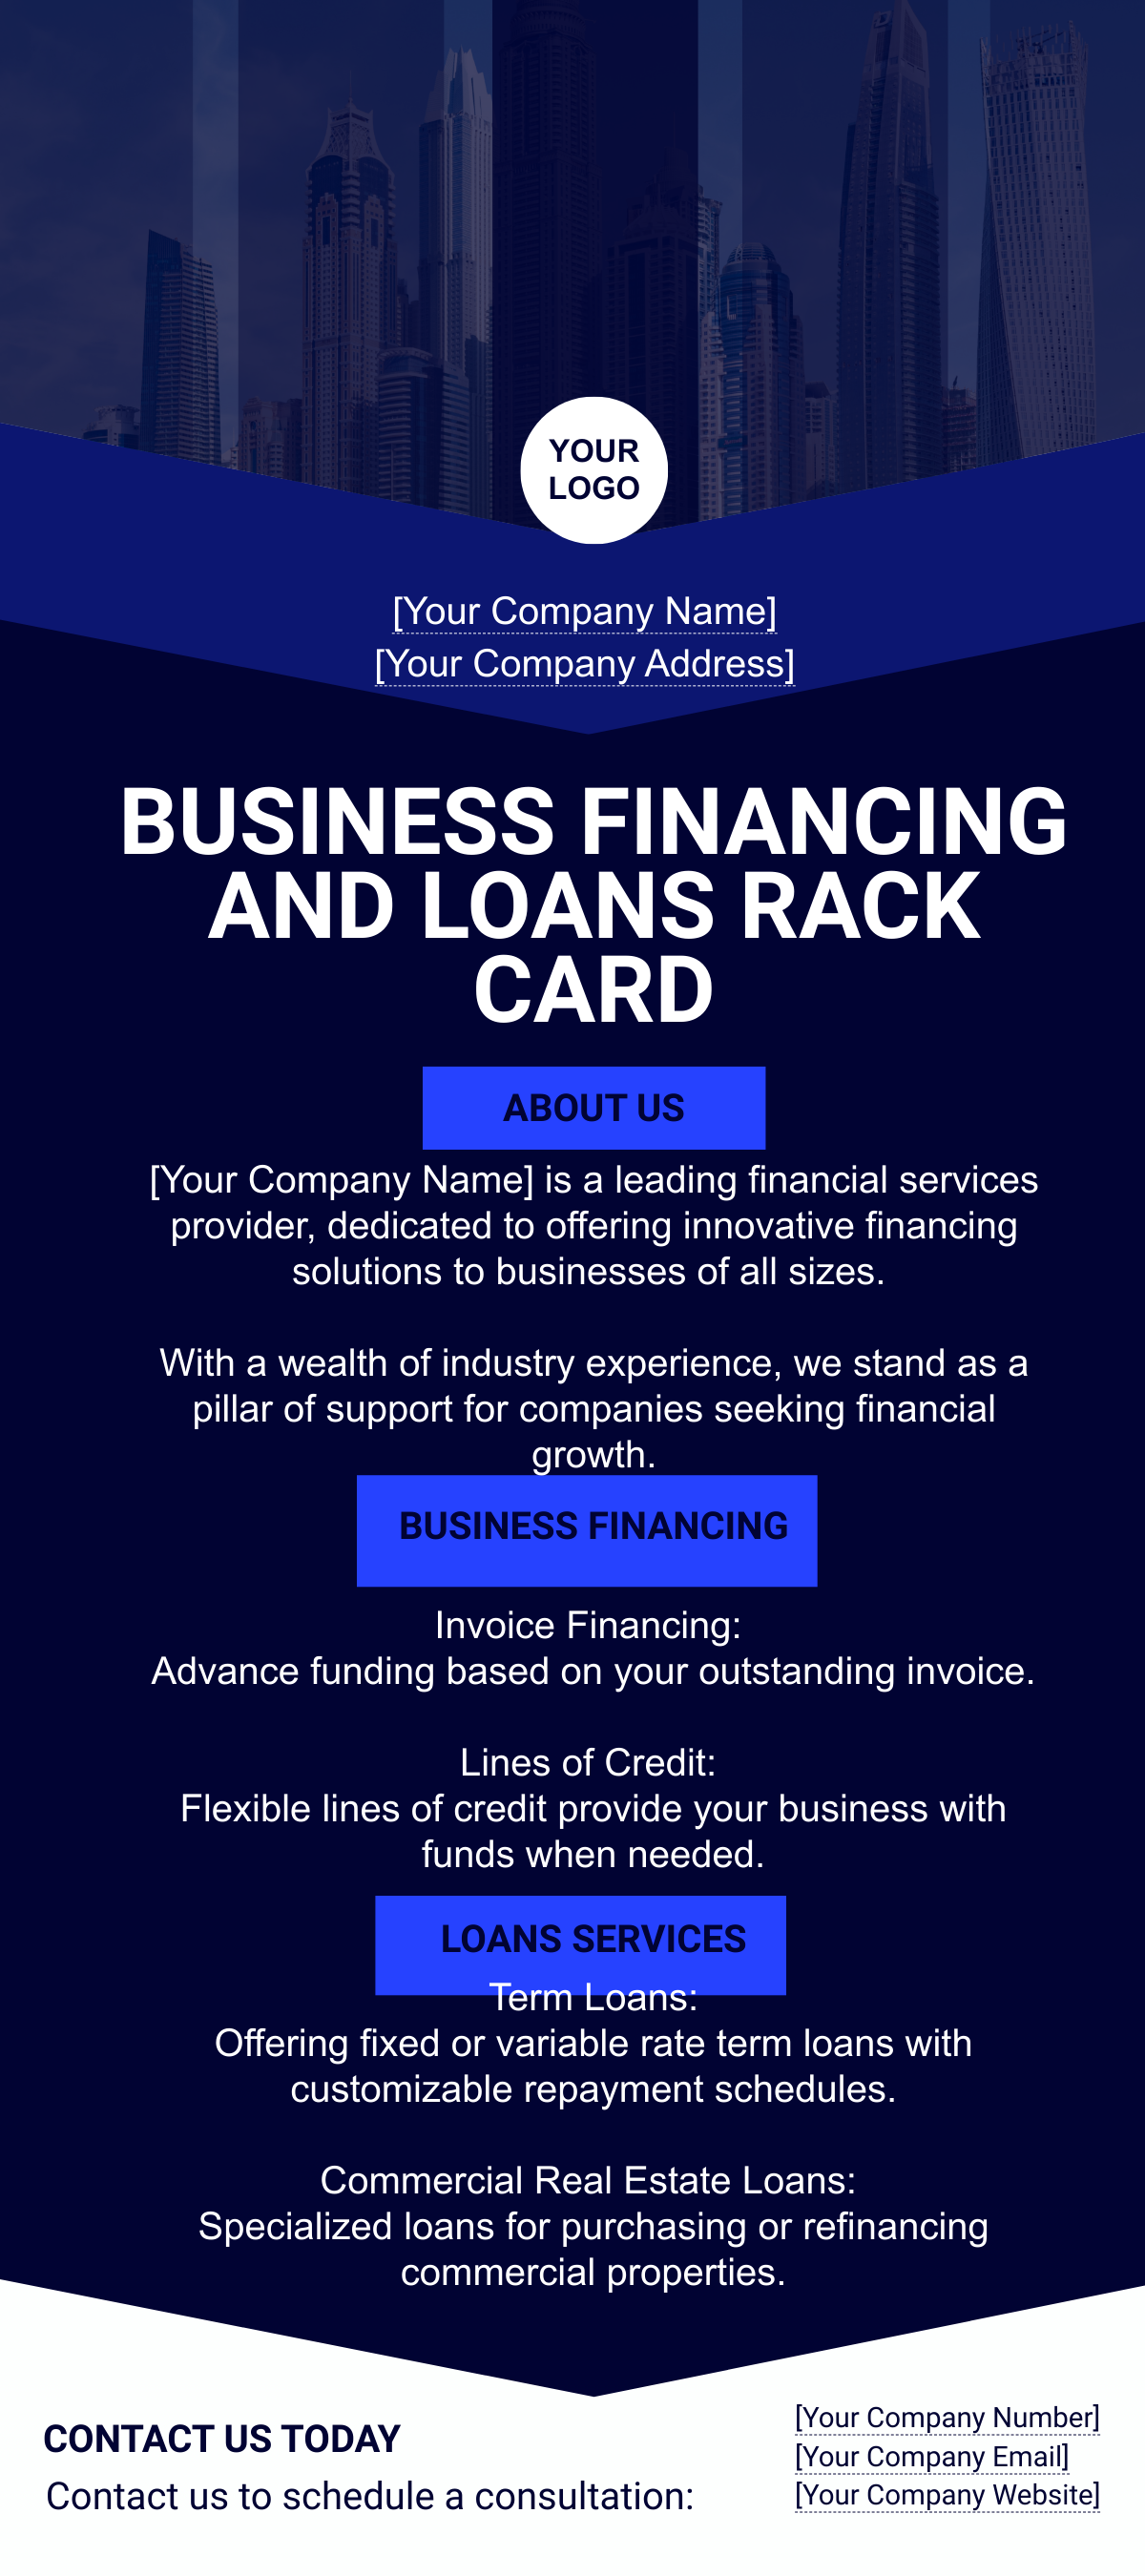 Business Financing and Loans Rack Card Template